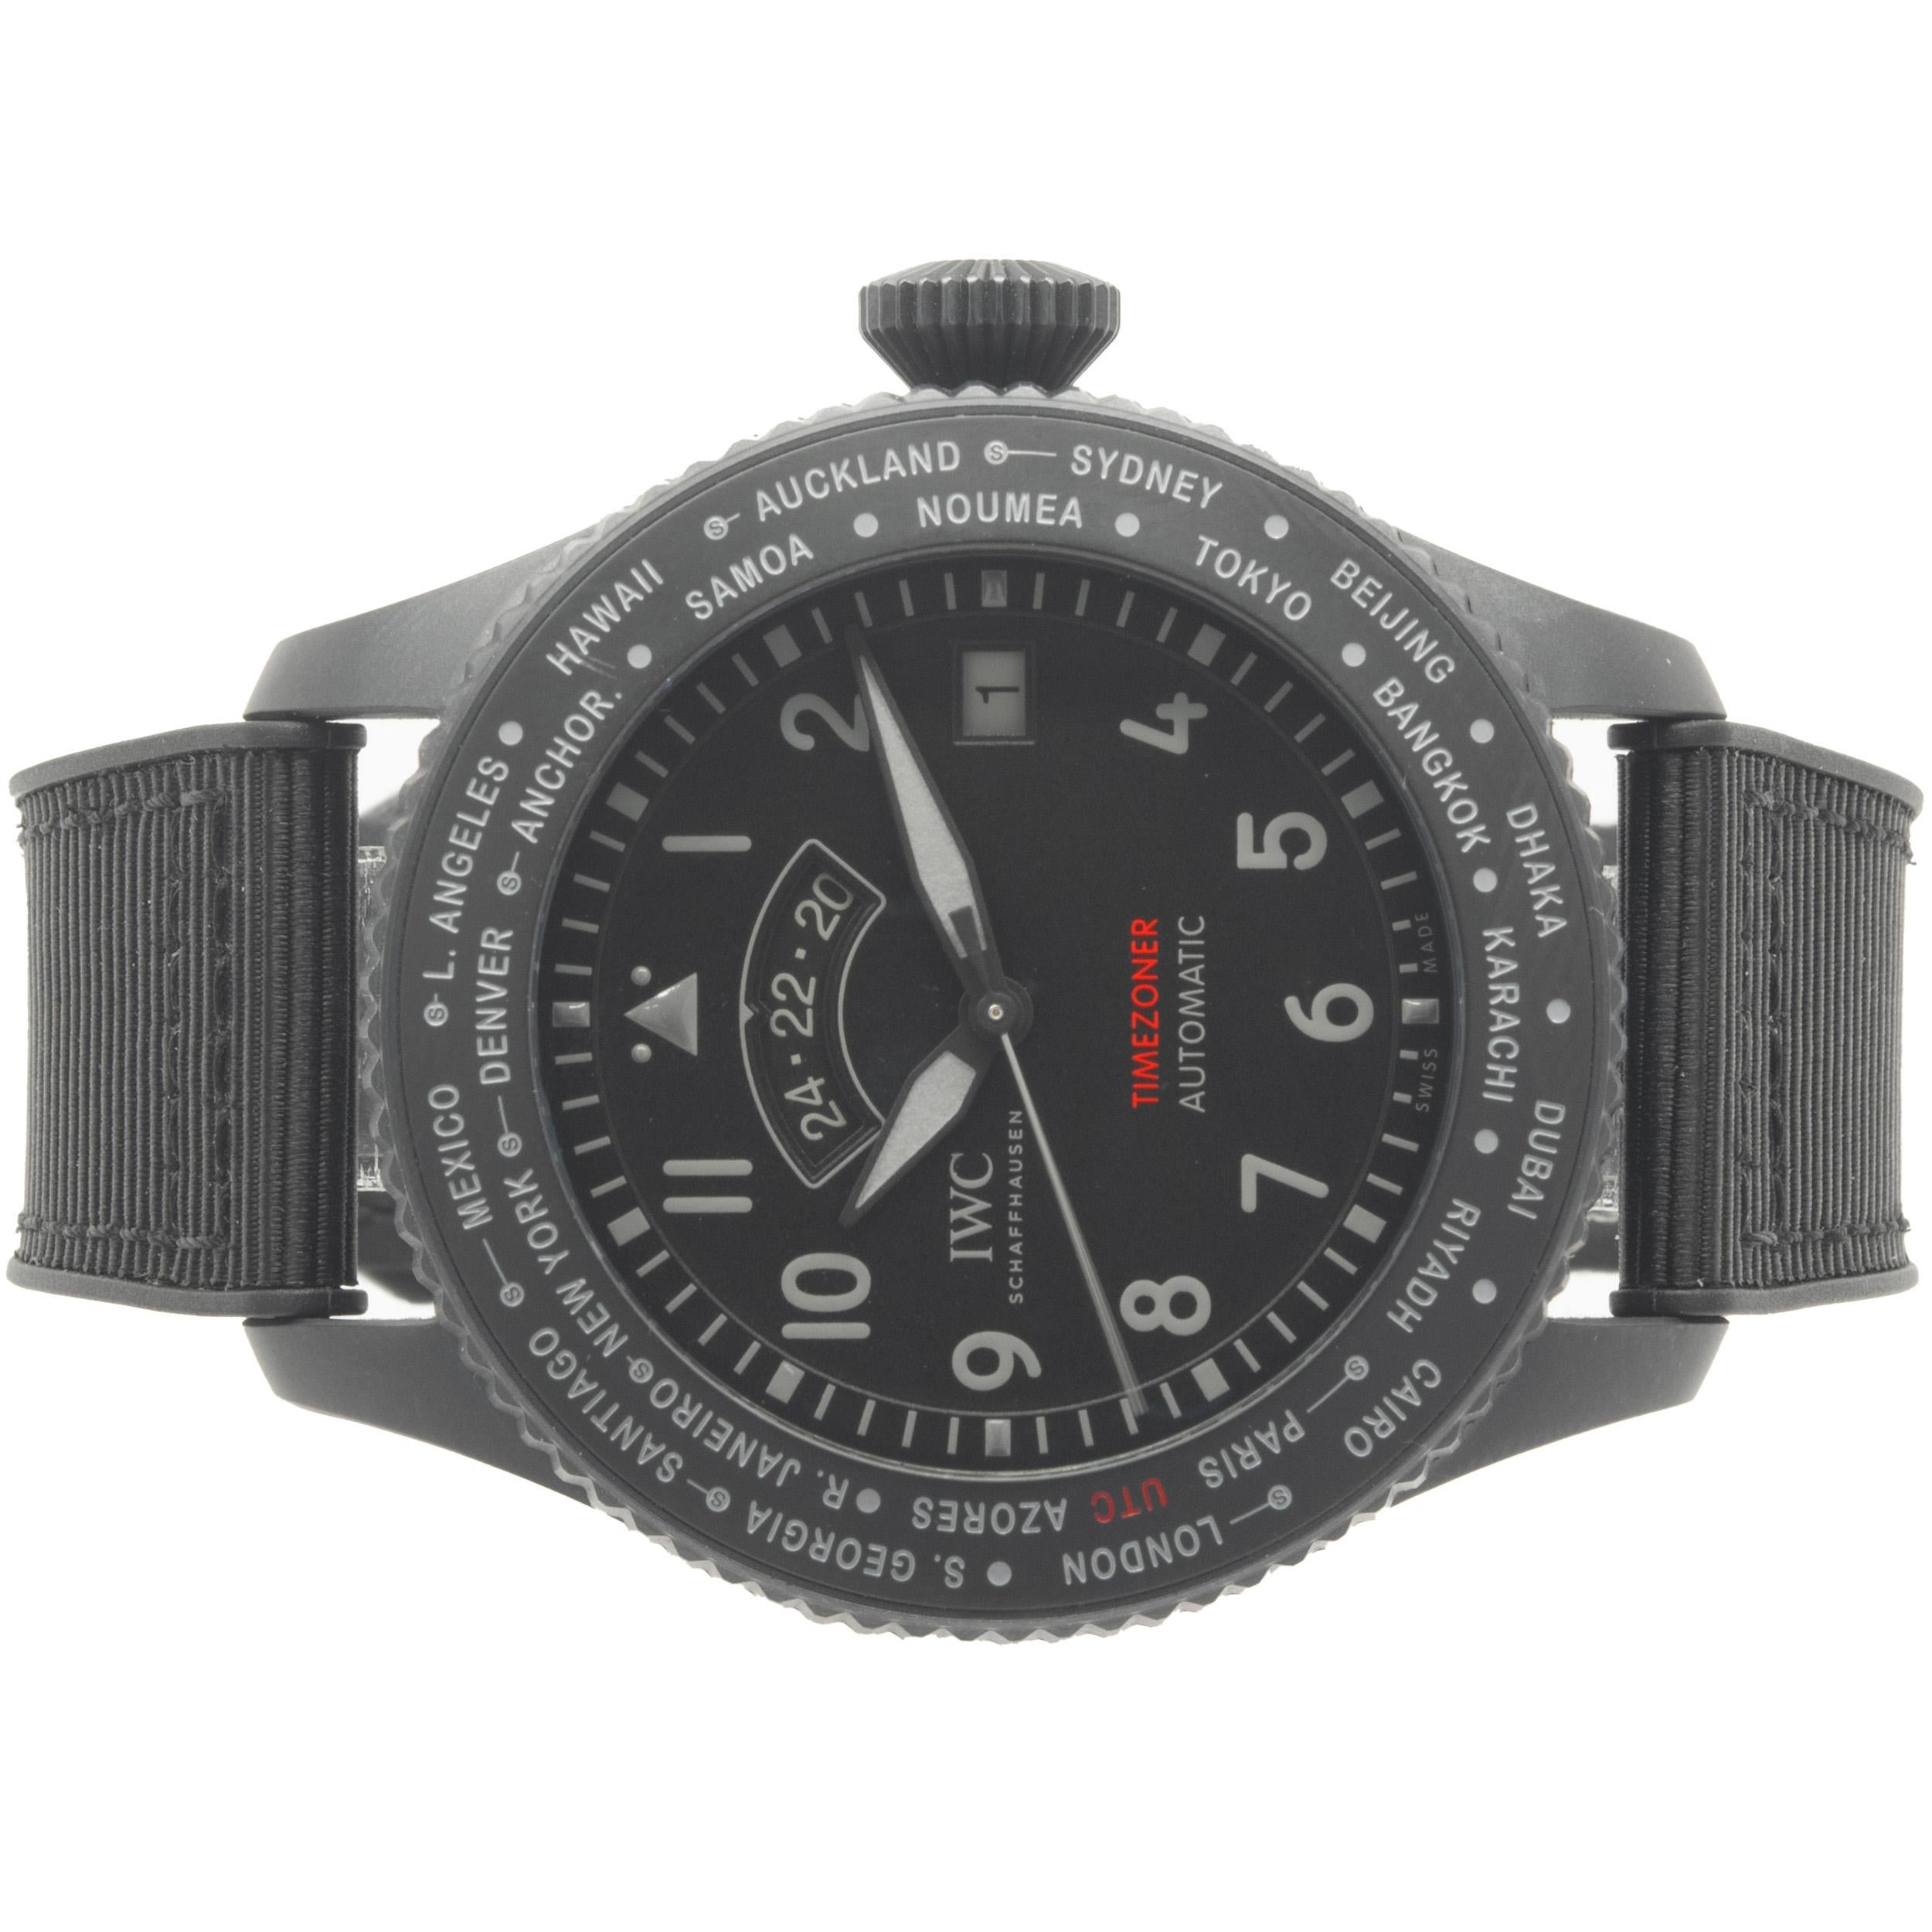 Brand: IWC
Movement: automatic
Function: hours, minuets, seconds, UTC time zone rotating bezel, 24 time zone
Case: 46mm round case, sapphire crystal, push/pull crown
Band: black rubber strap, buckle
Dial: black arabic
Reference #: IW395505
Serial #: